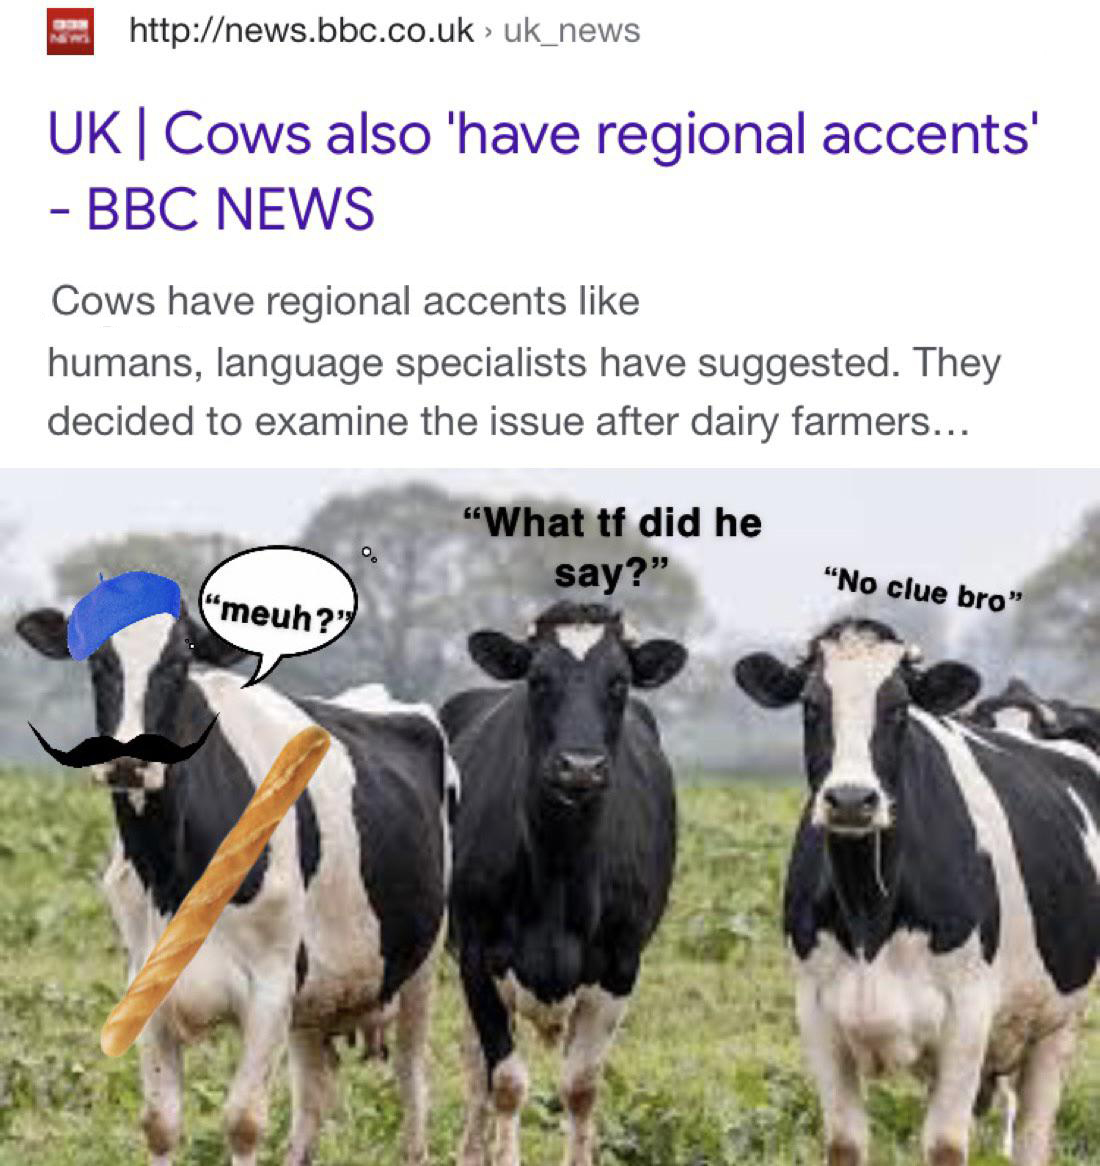 > uk_news > Uk | Cows also 'have regional accents' Bbc News Cows have regional accents humans, language specialists have suggested. They decided to examine the issue after dairy farmers... What tf did he say?" "No clue bro" "meuh?"